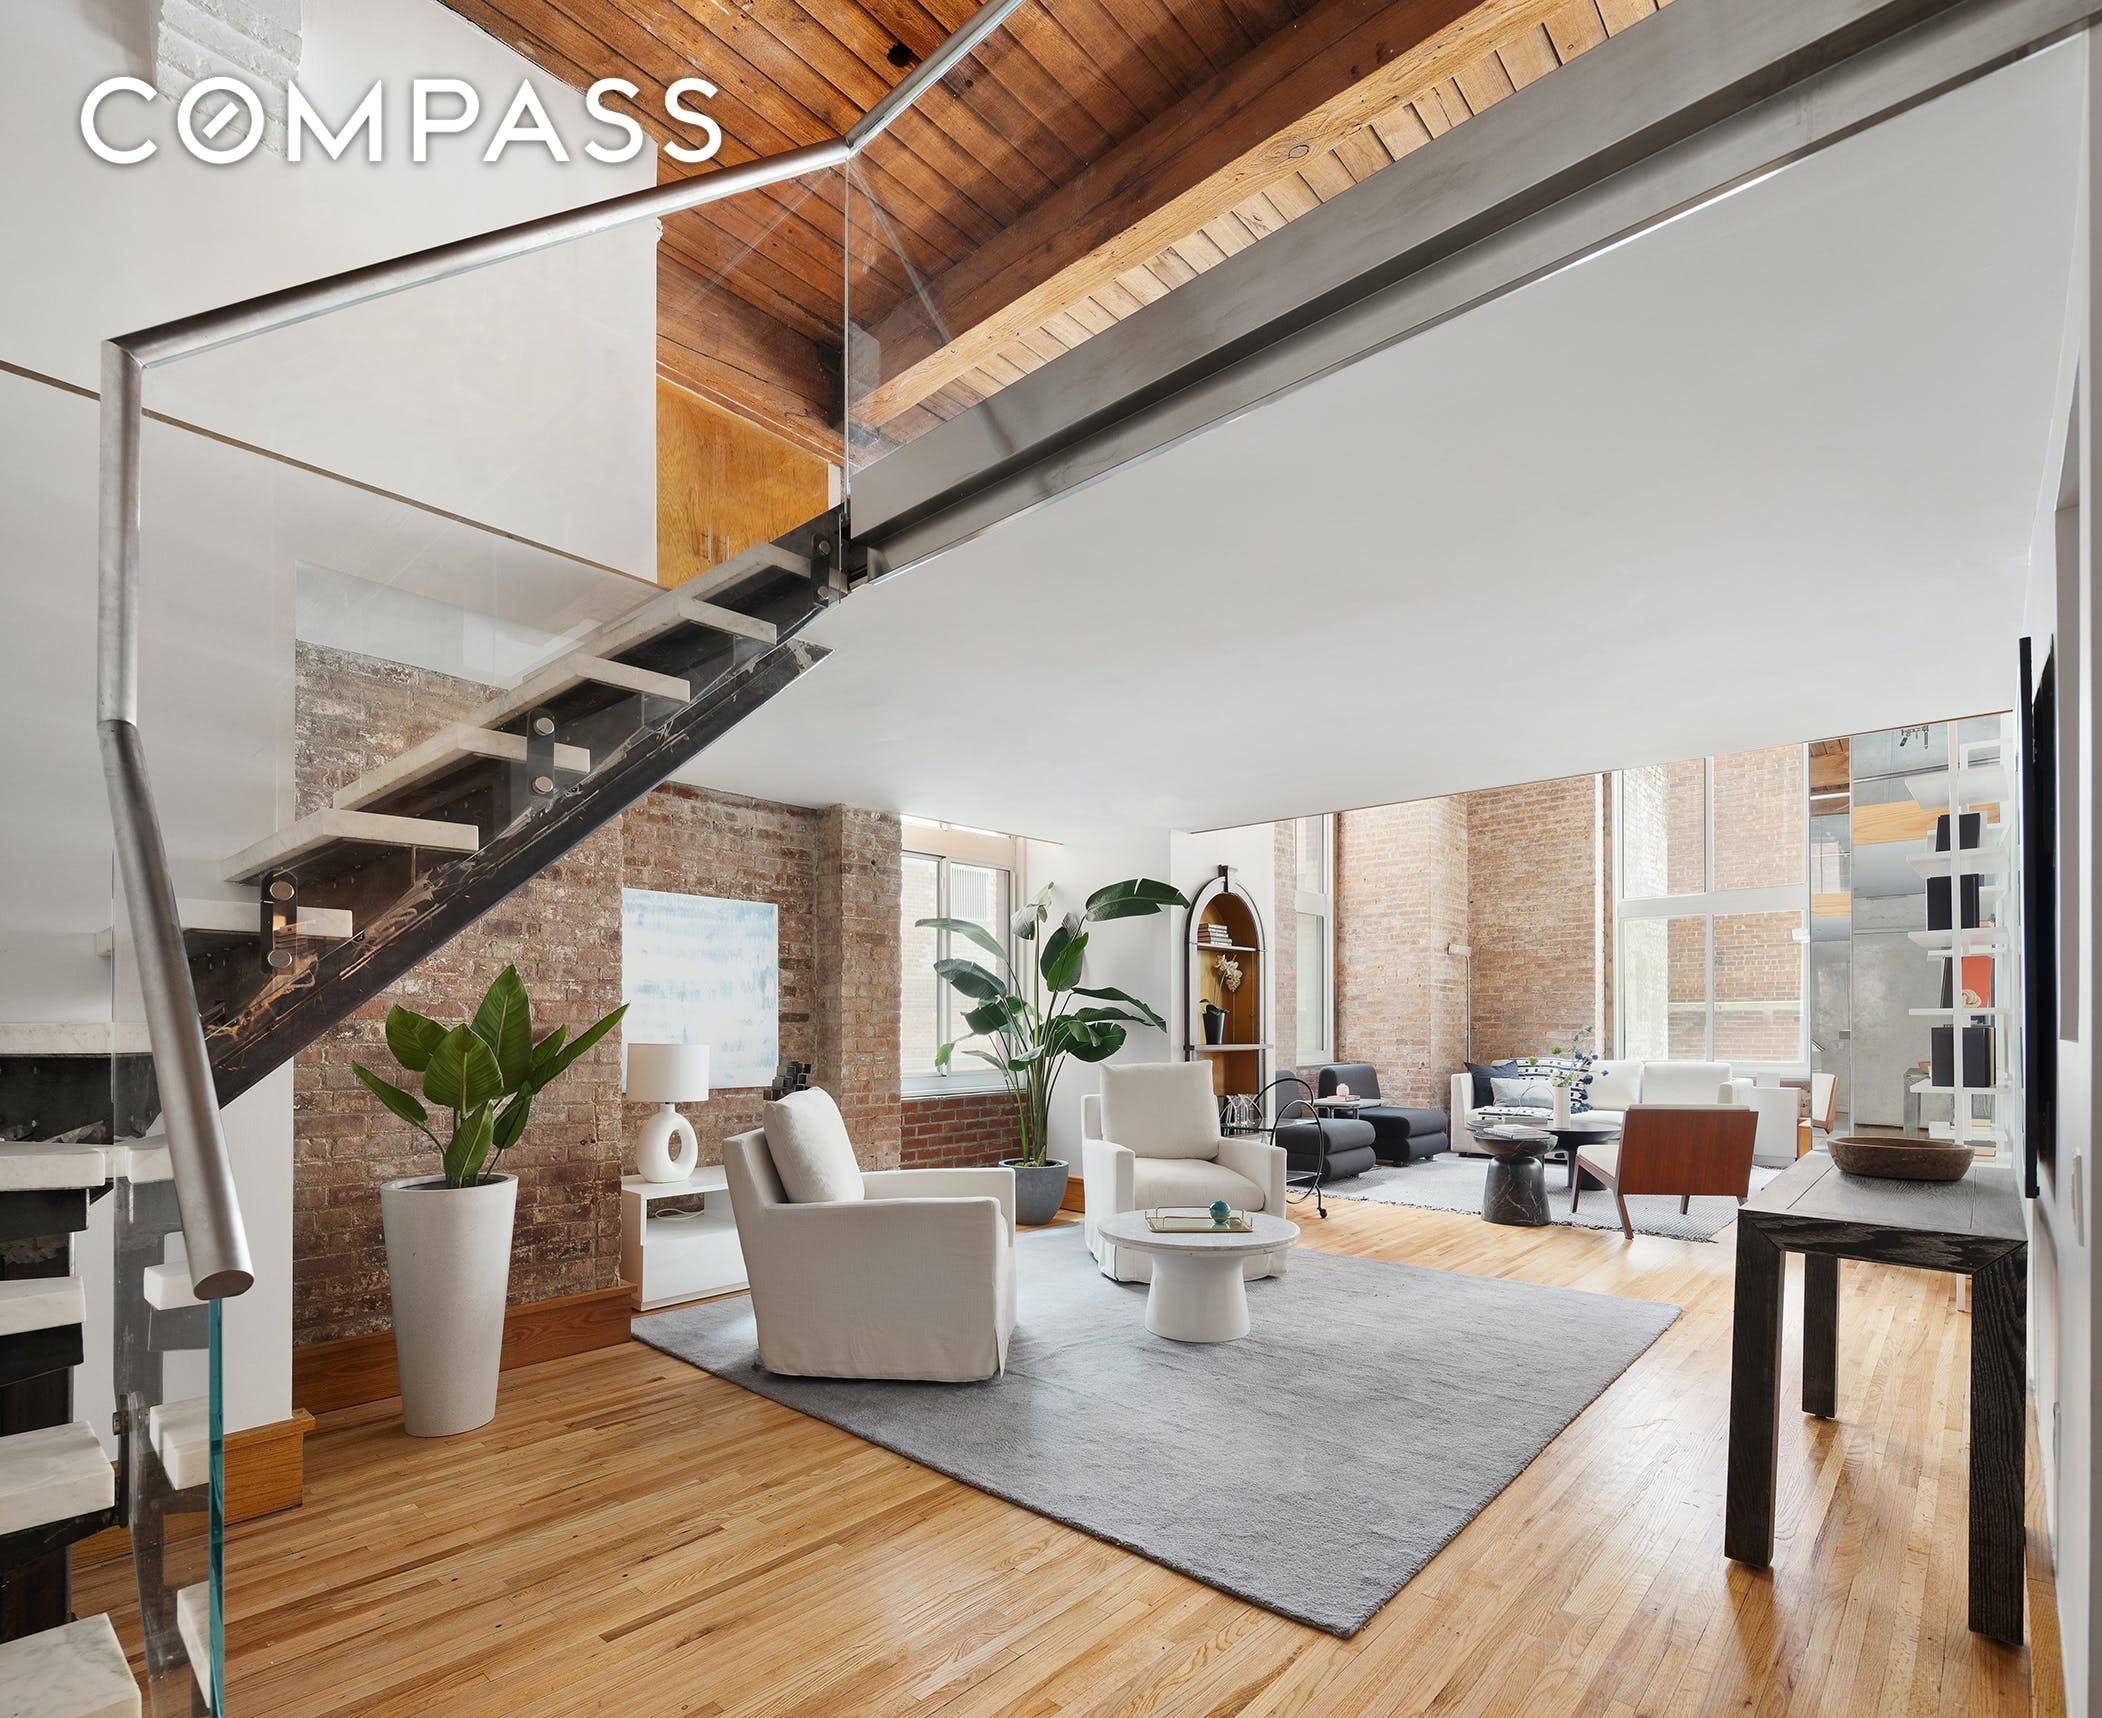 Situated on a tree lined block in Gramercy Park, this grand scale double width loft spans 2, 900sq ft and features soaring 14 ft ceilings with 3 bedrooms, 2 bathrooms ...